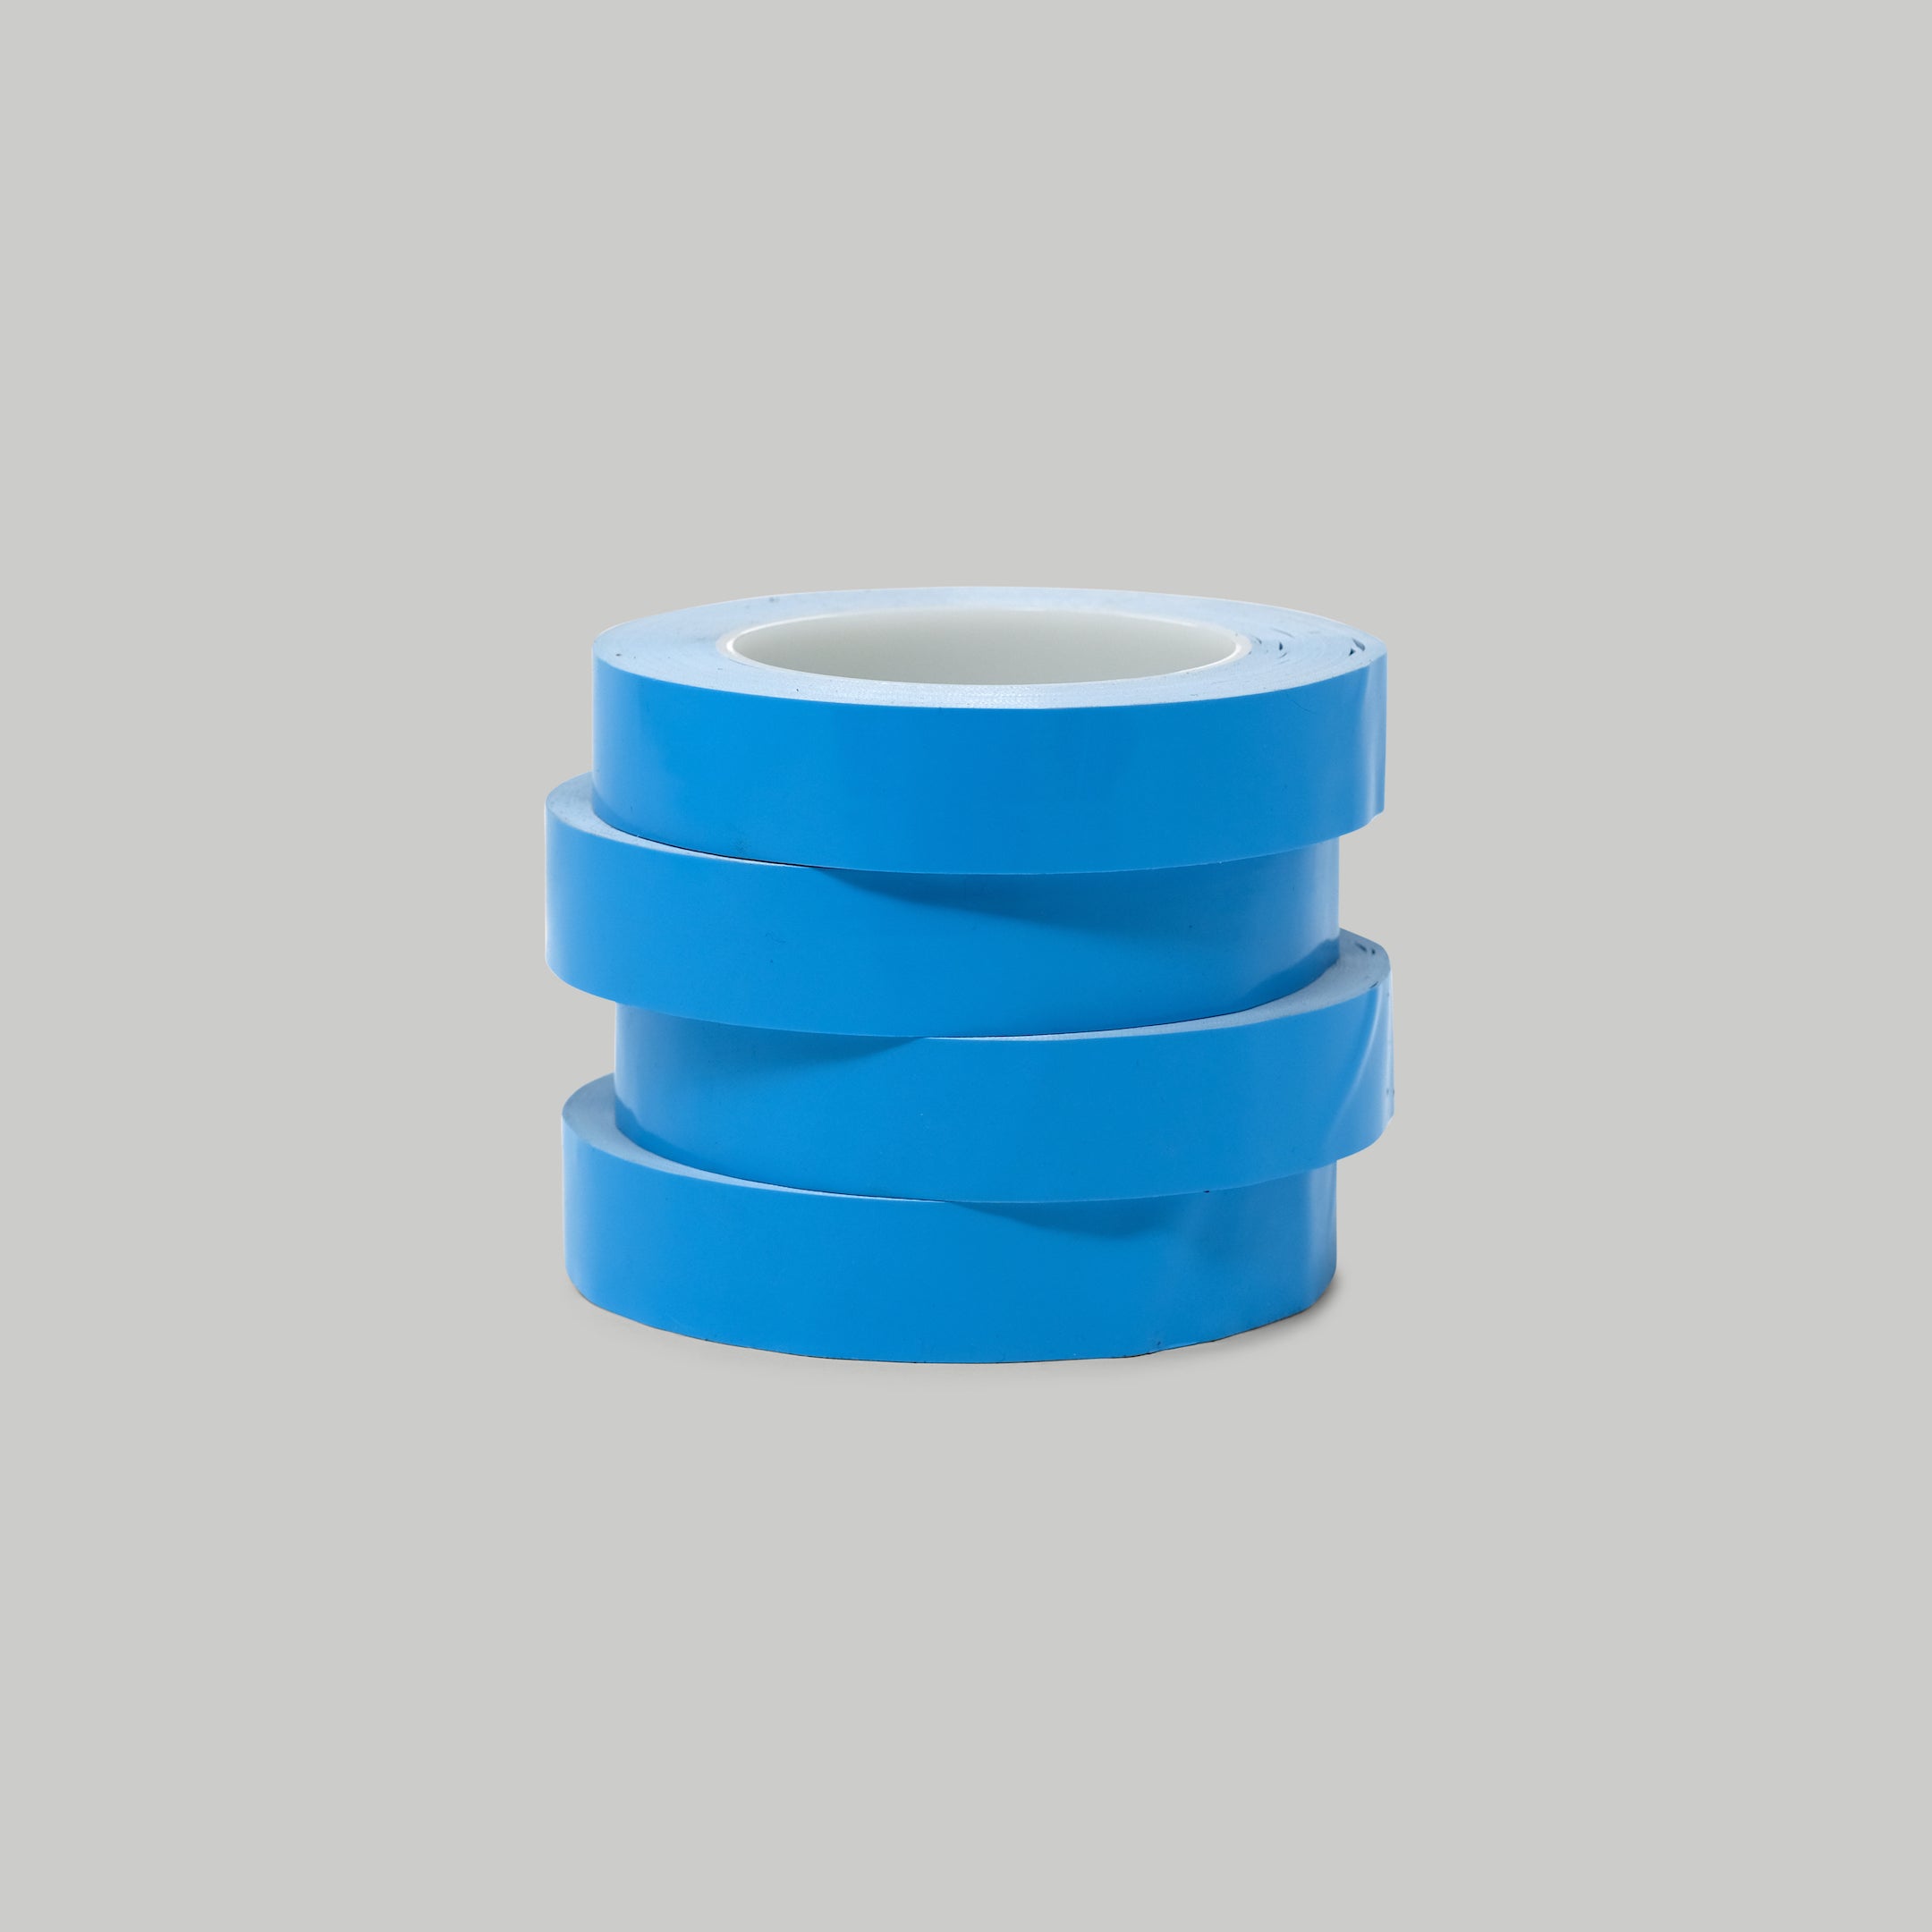 Double Sided Thermal Tape (Hot Stamp Tape)